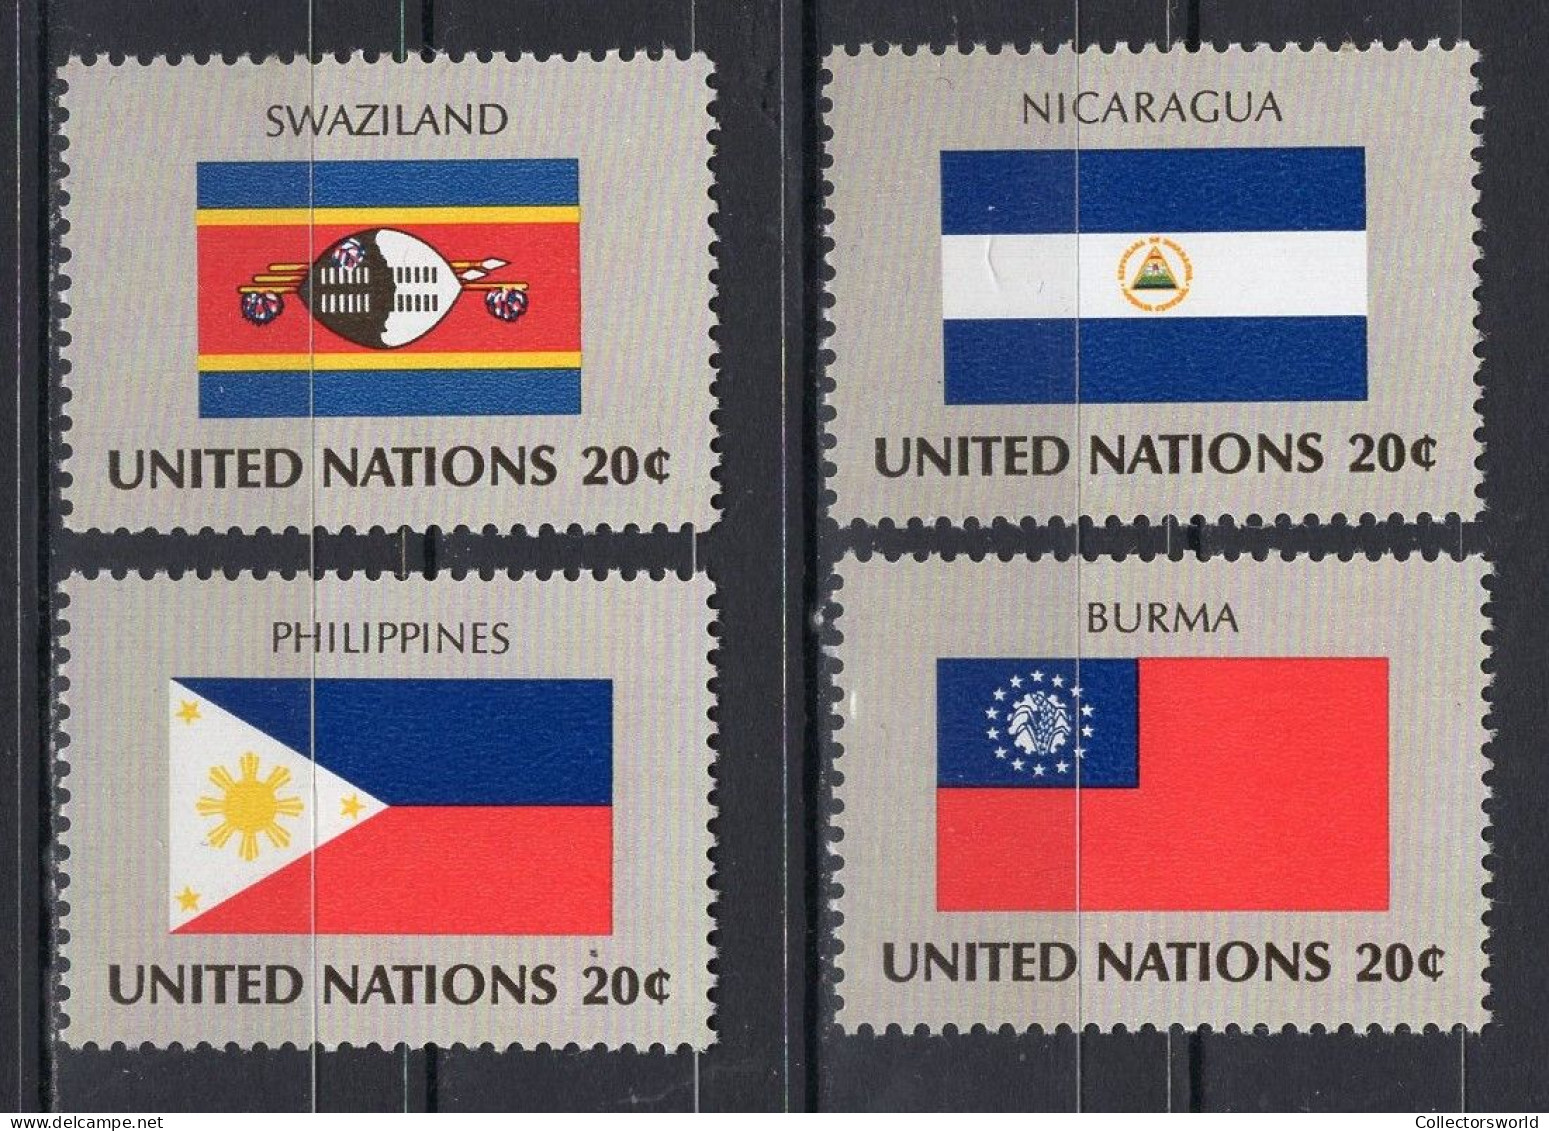 United Nations UN New York Serie 4v 1982 Flag Serie Philippines Swaziland Nicaragua MNH - Unused Stamps